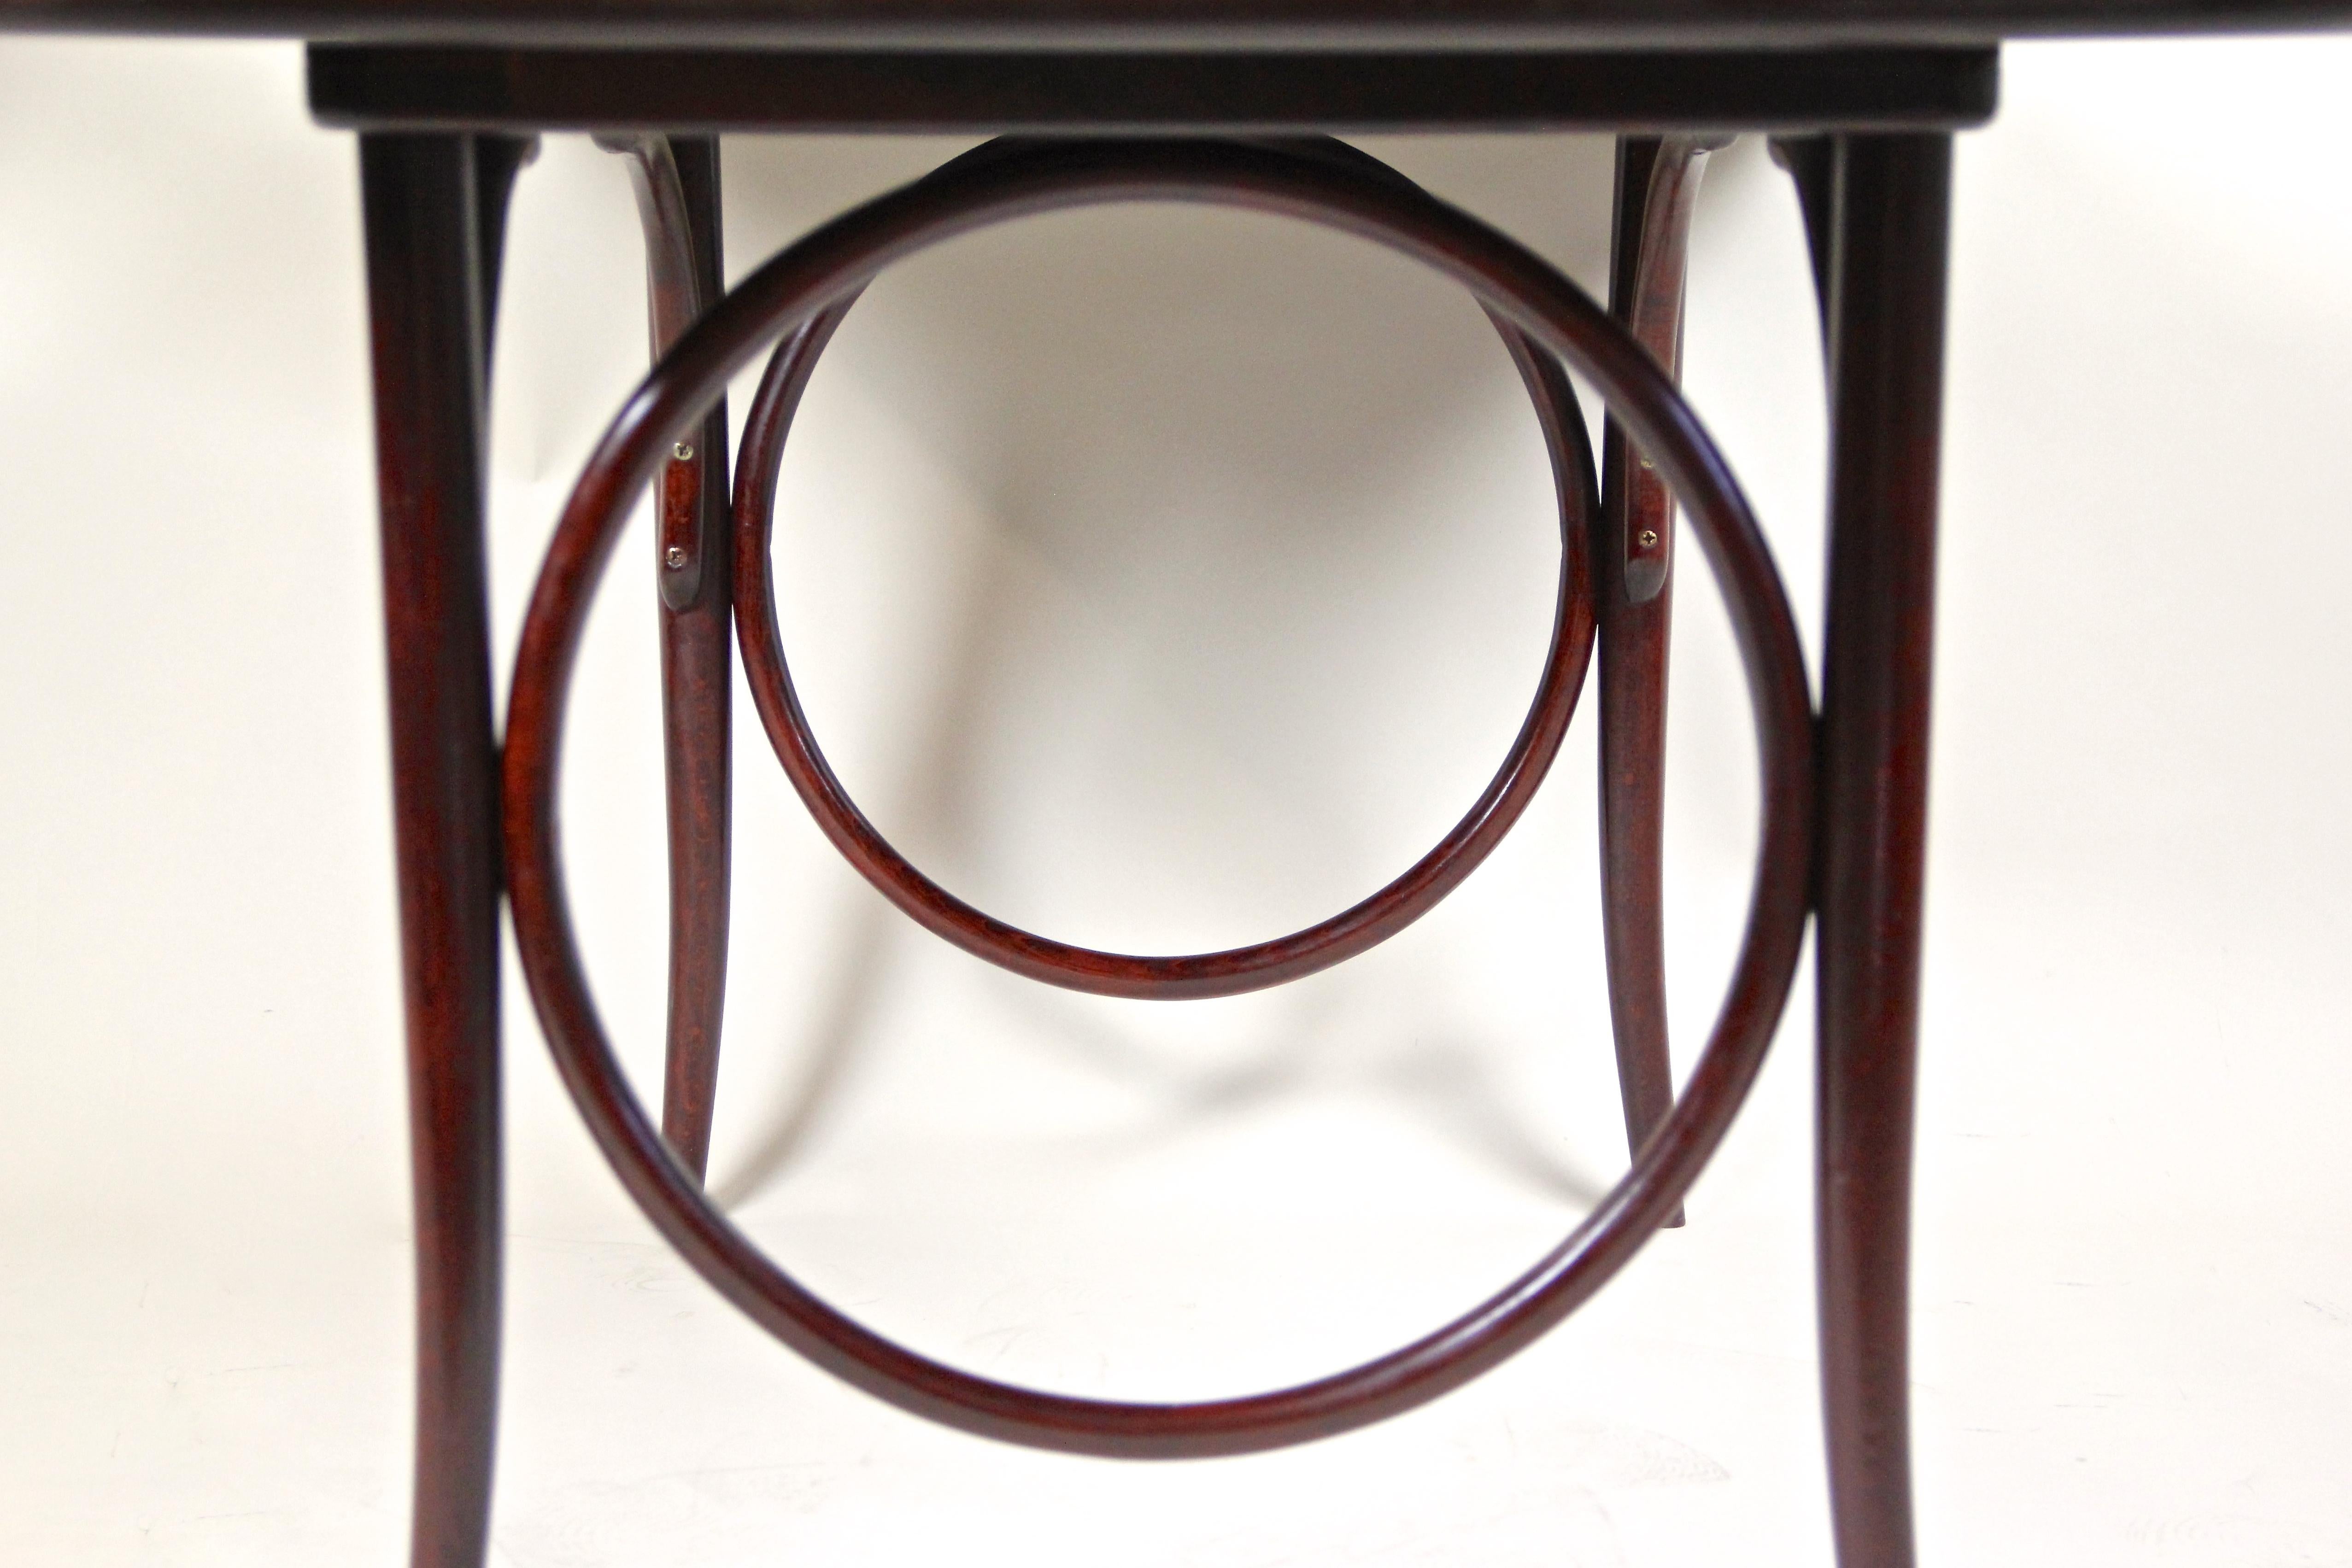 Vintage Thonet Sofa Table with Ring Design, Austria, circa 1970 For Sale 3